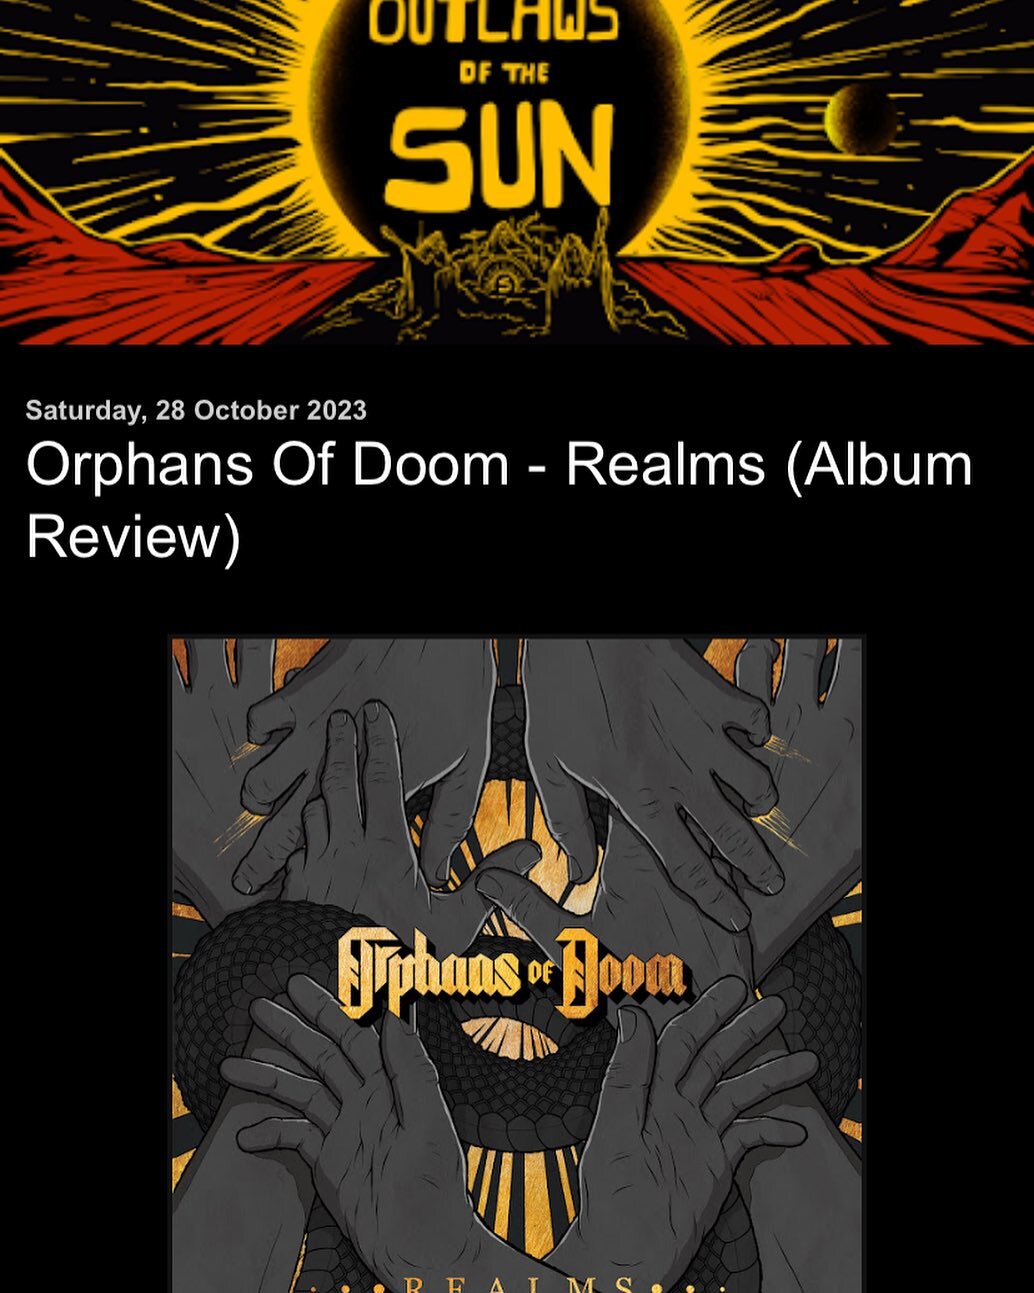 A great early review of Realms via Outlaws of the Sun. Thank you Steve!

https://outlawsofthesun.blogspot.com/2023/10/orphans-of-doom-realms-album-review.html

#kansascitymetal #outlawsofthesun #orphansofdoom #realms #postmetalbands